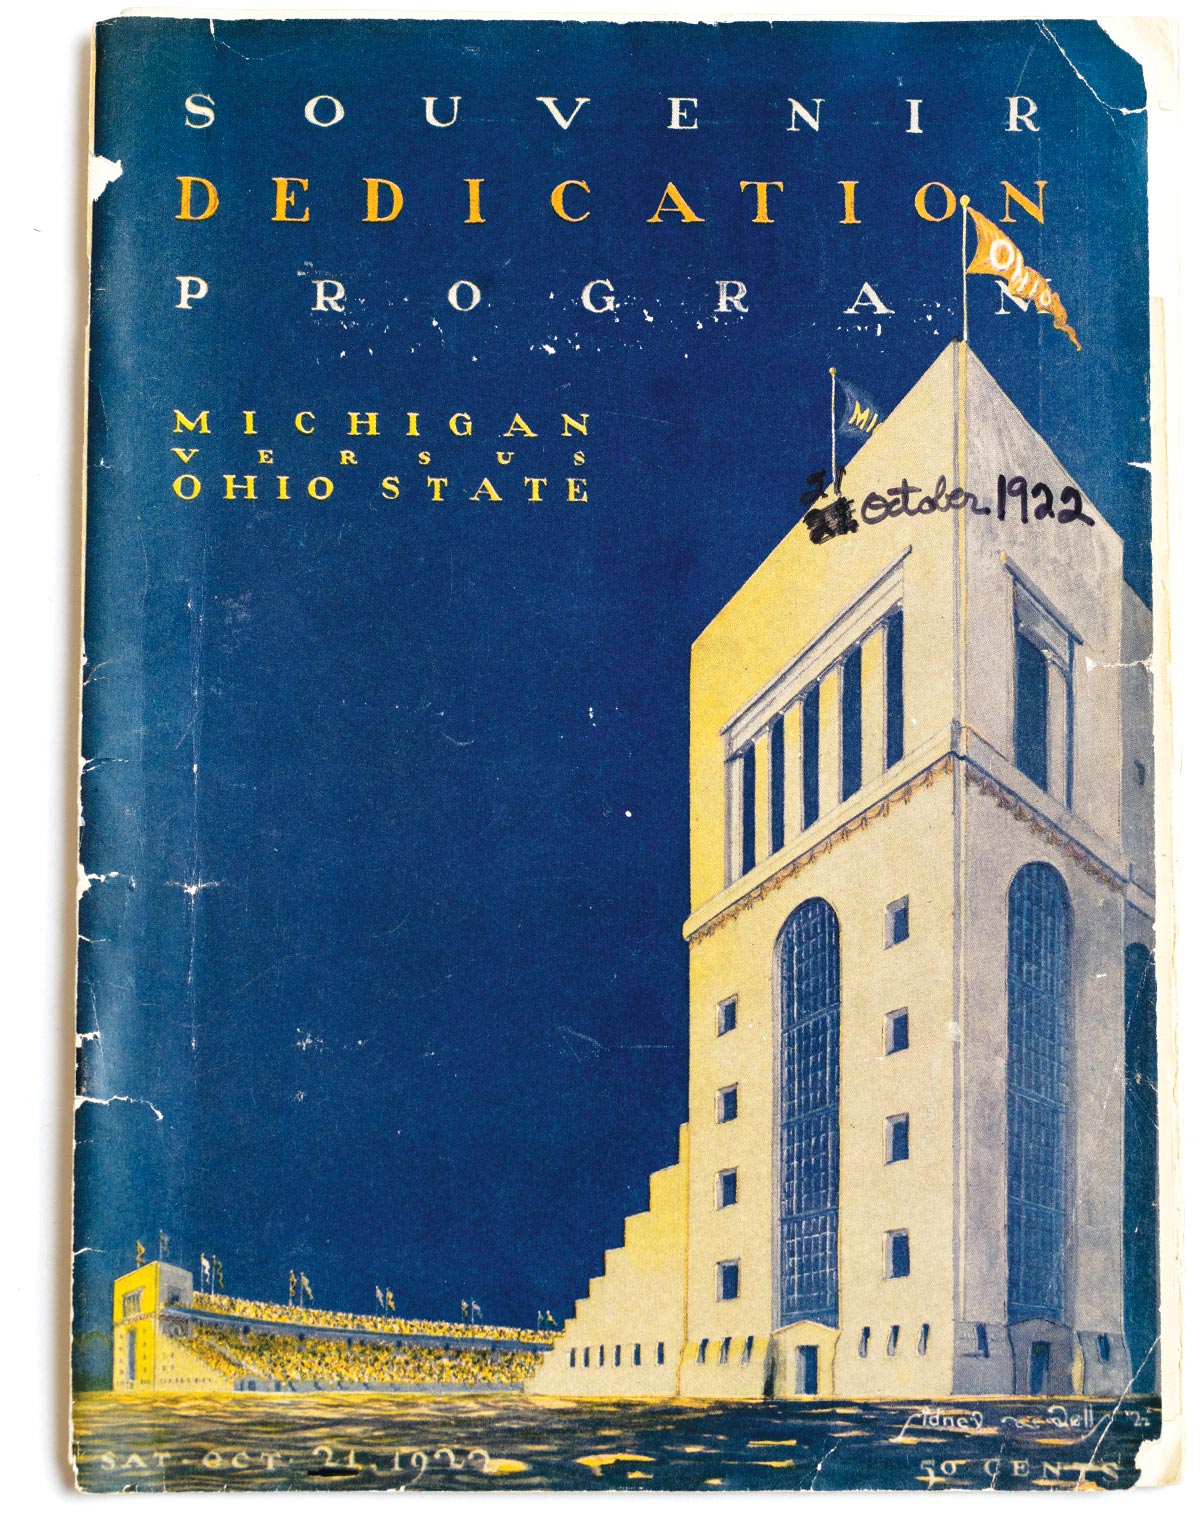 A worn booklet shows an art deco-style drawing of the south end of Ohio Stadium. All of these years later, the blue sky, which takes up most of the cover, is still richly colored, a darker blue than the sky ever would be in real life.